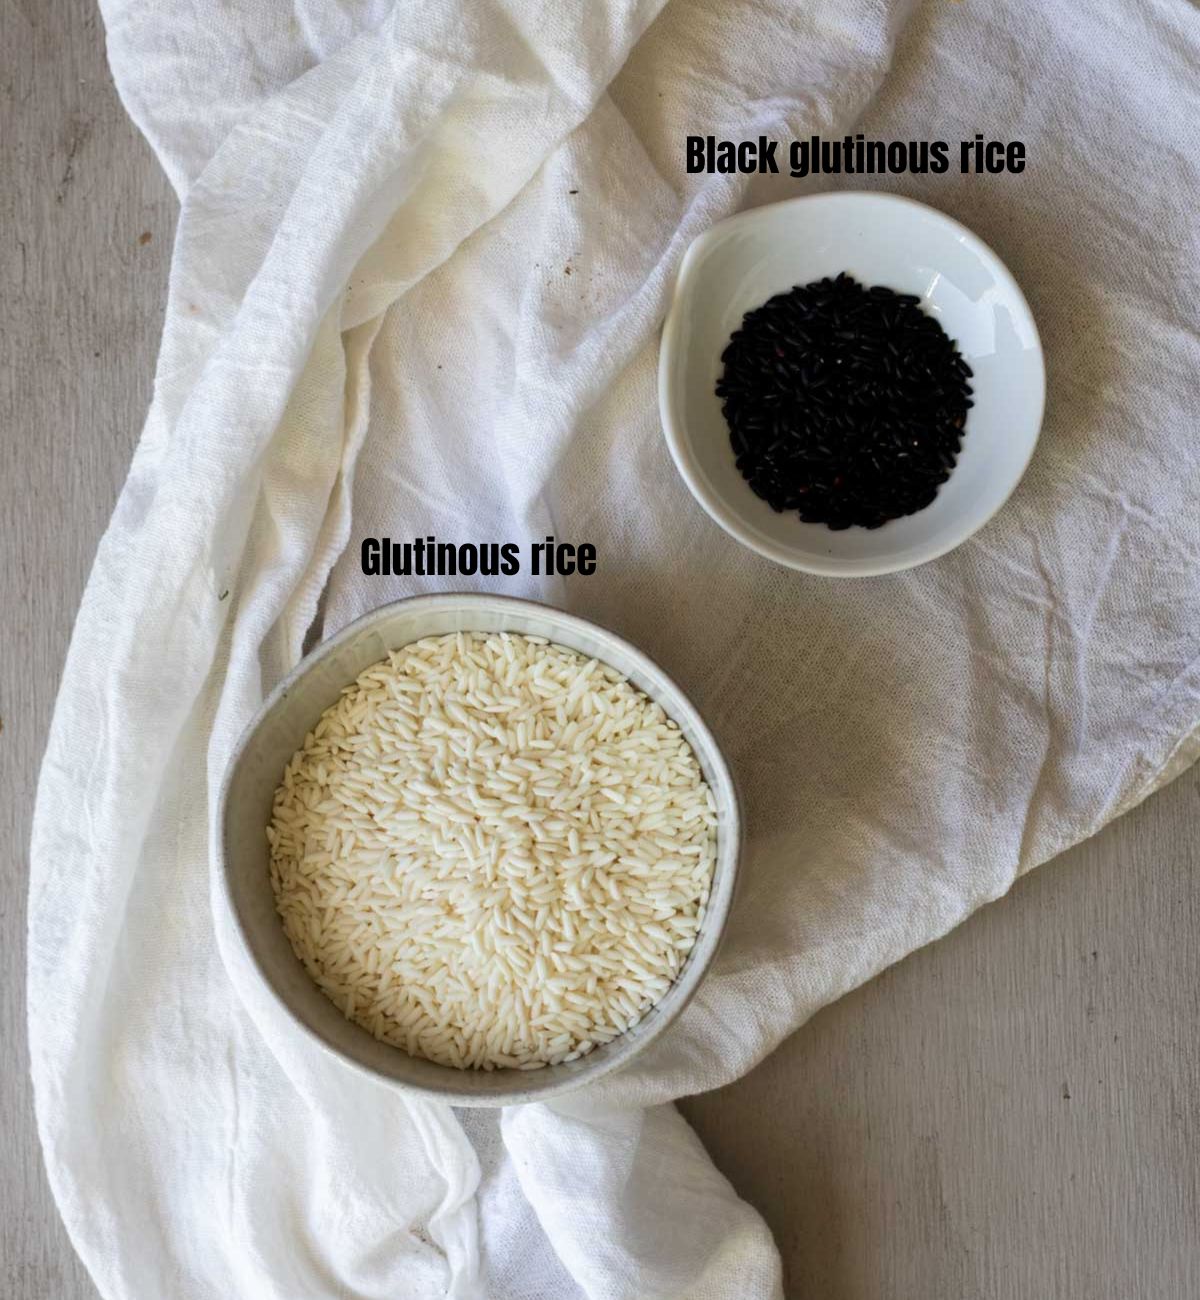 Glutinous rice and black glutinous rice in white bowls.